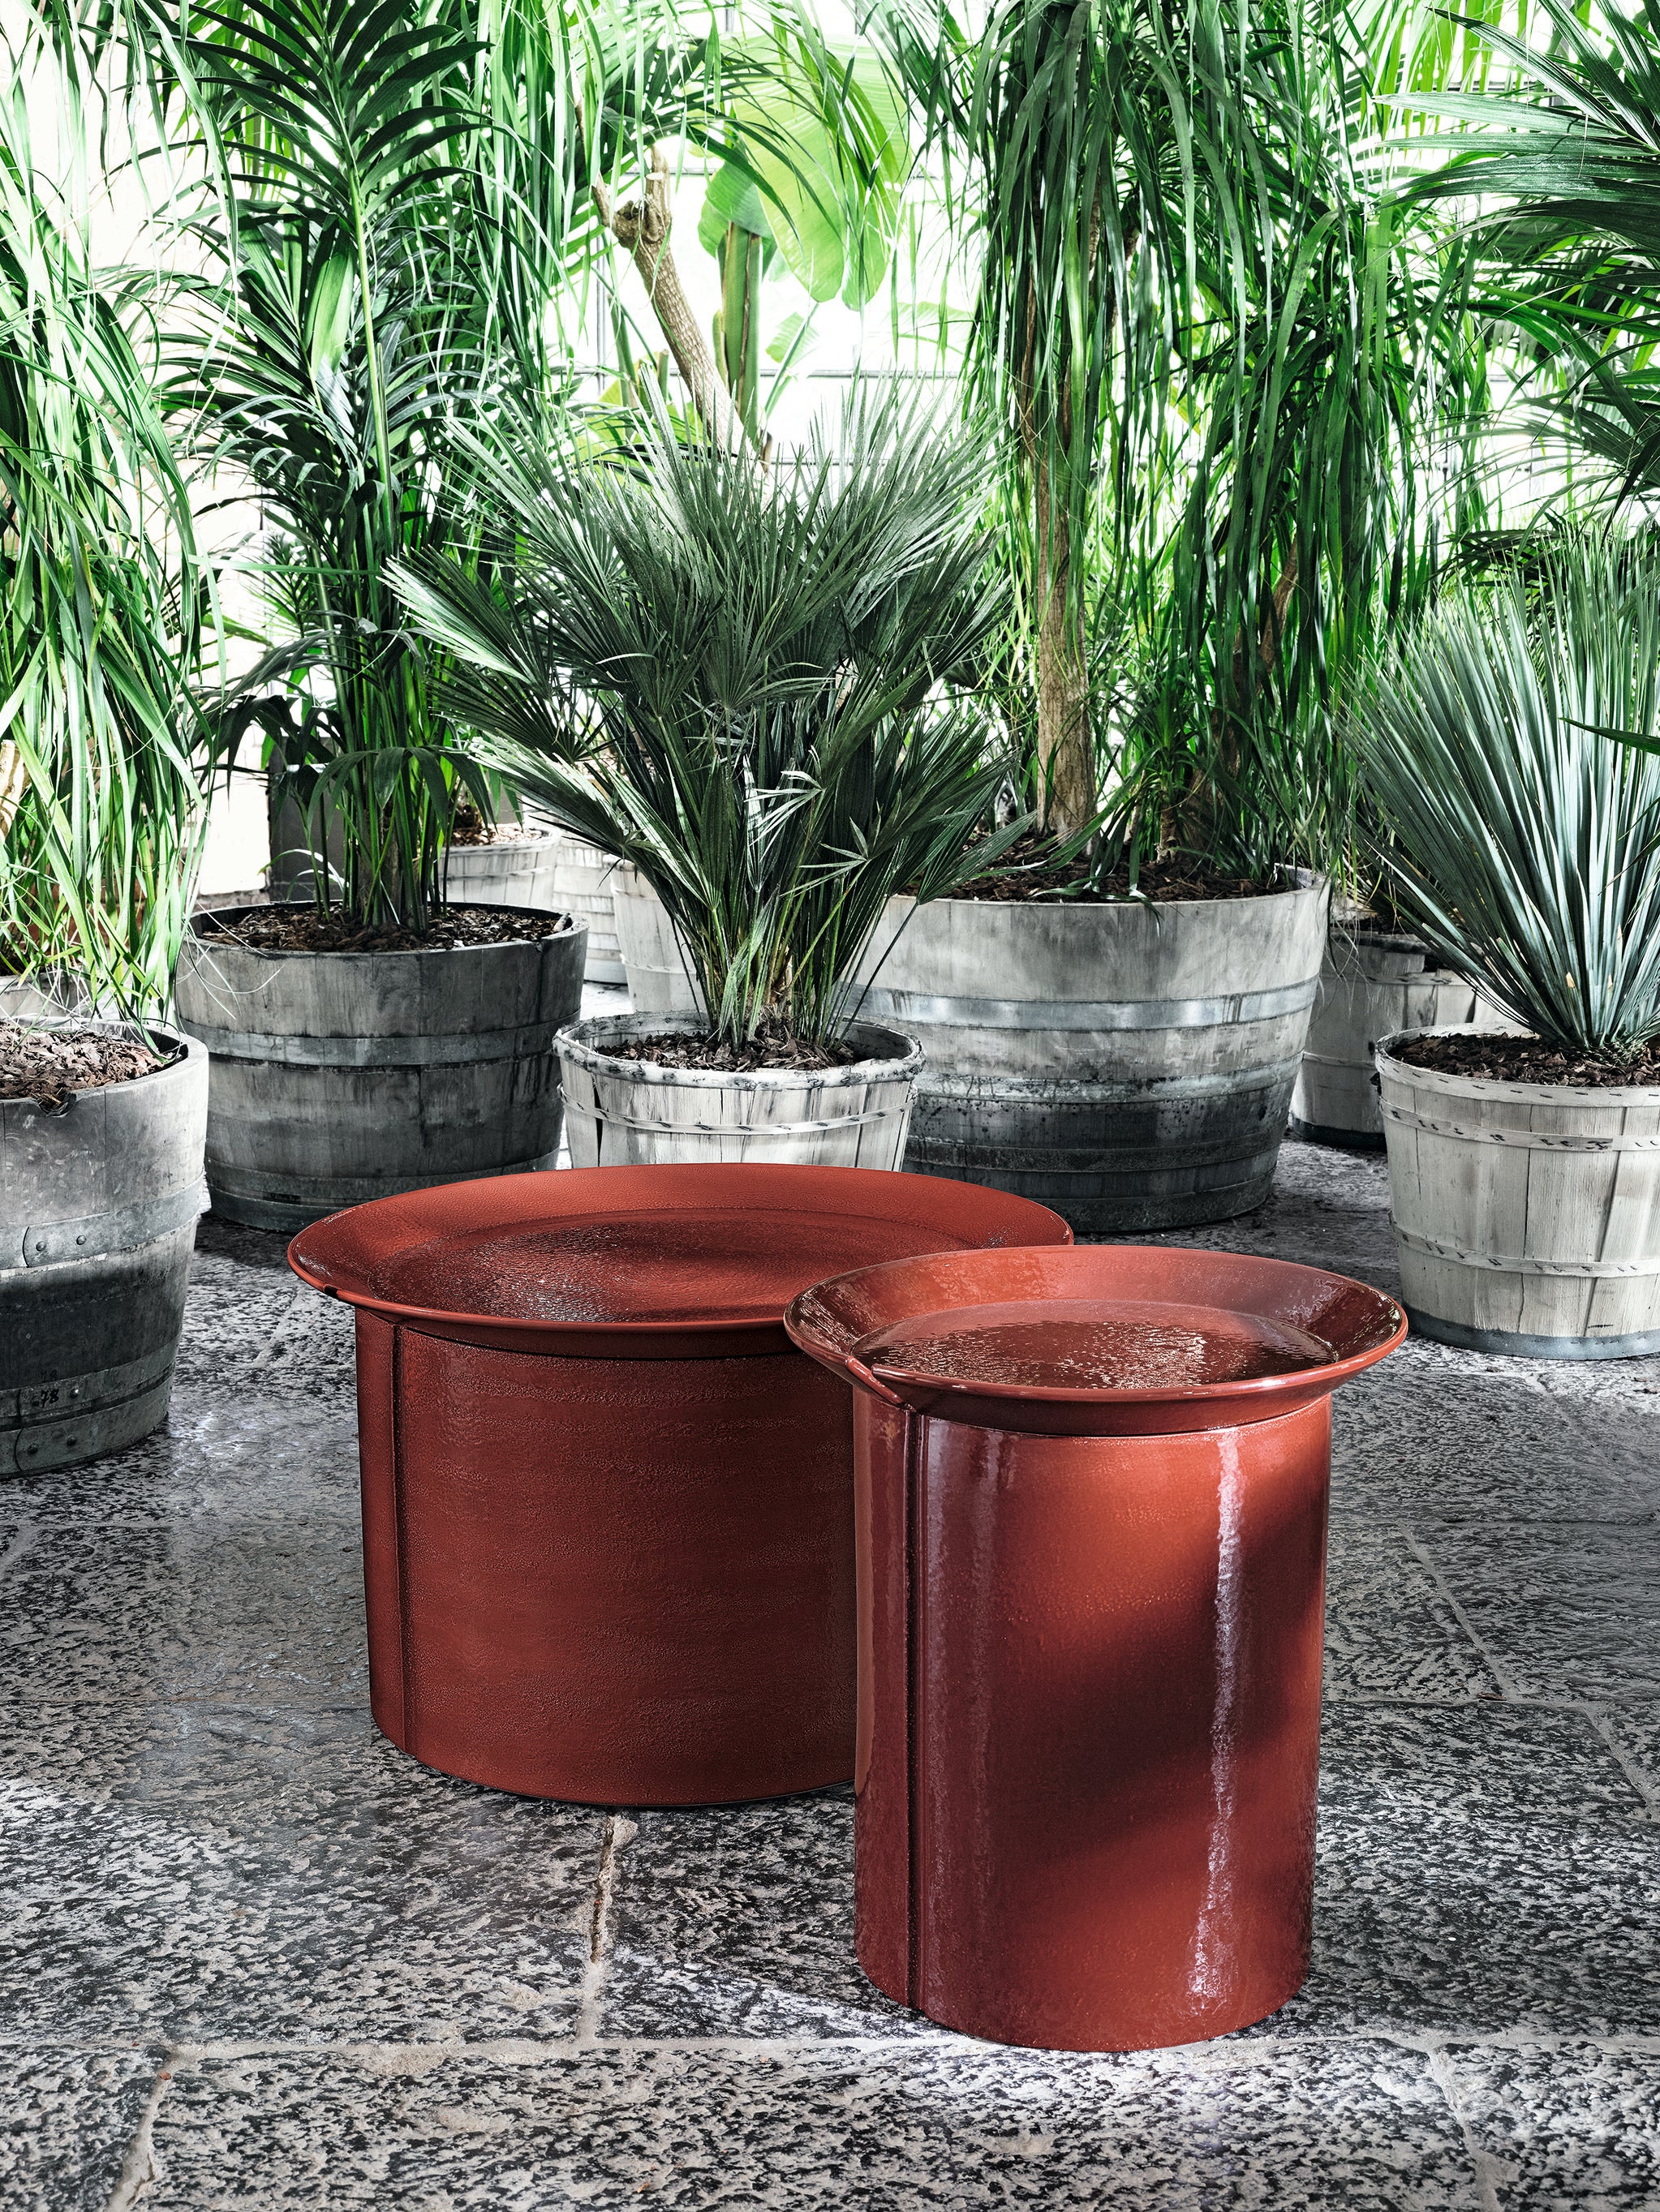 Outdoor conviviality is the key of one of the collections by Federica Biasi. Brise, literally breeze, aims at taking us back to that pleasant sensation when a breeze makes the summer heat milder to enjoy moments of relaxation en plein air and,